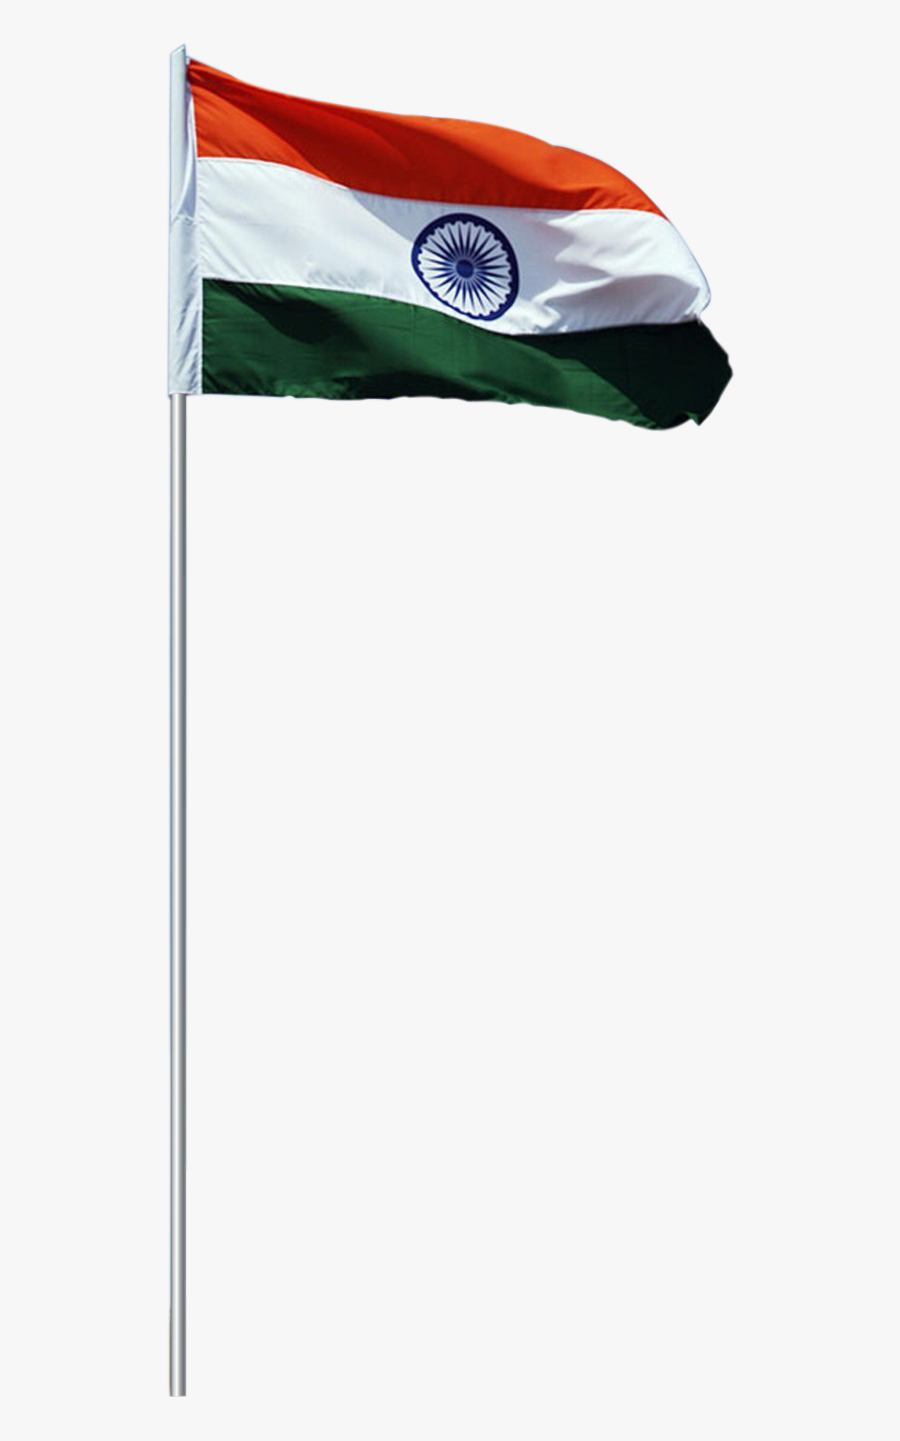 Indian Flag Hd Png - 15 August Image 2019, Transparent Clipart